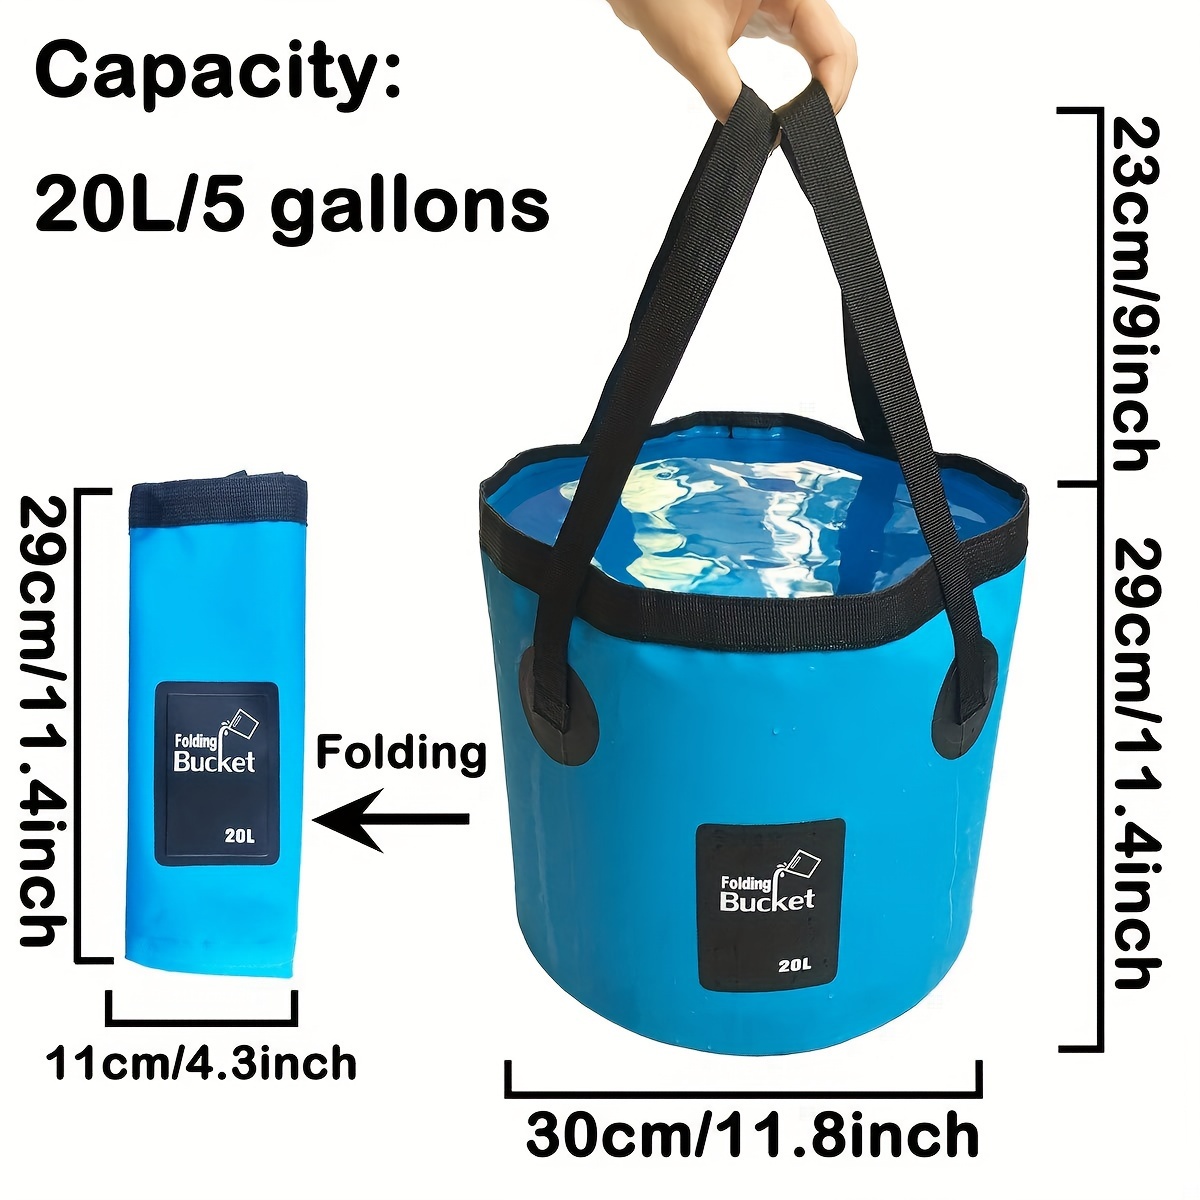 AUTODECO 2 Pack Collapsible Bucket 5 Gallon Container Folding Water Bucket Portable Wash Basin for Outdoor Travelling Camping Fishing Gardening Car